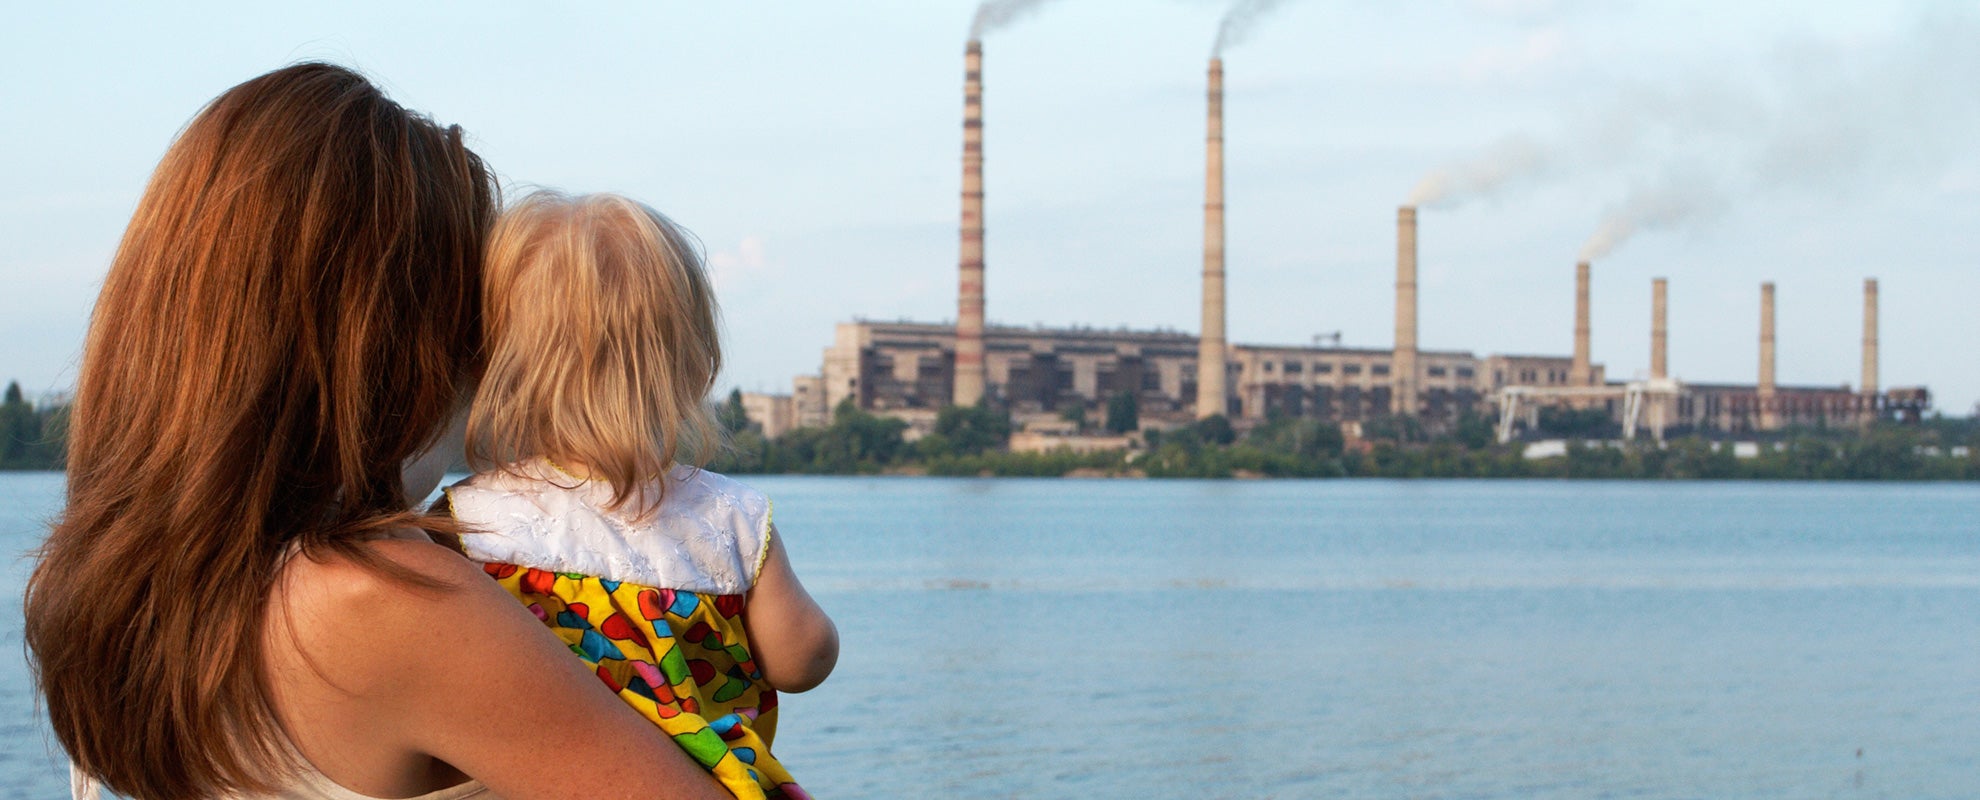 A mother and child near an industrial plant.